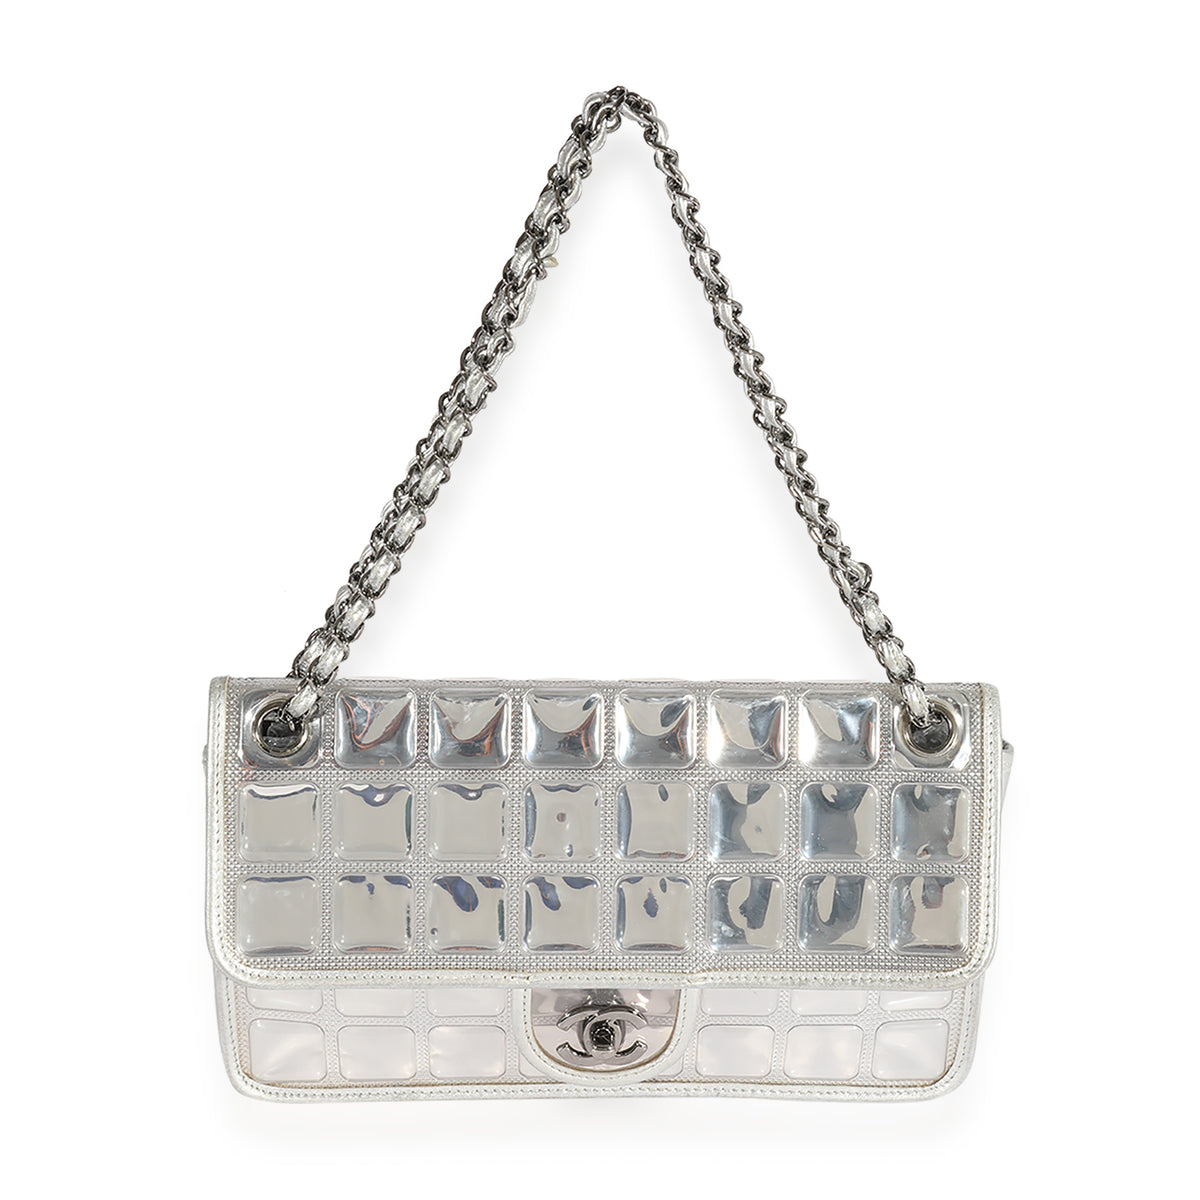 Chanel Ice Cube Bag - 5 For Sale on 1stDibs  chanel ice cube flap bag, ice  cube chanel bag, chanel ice cube tote